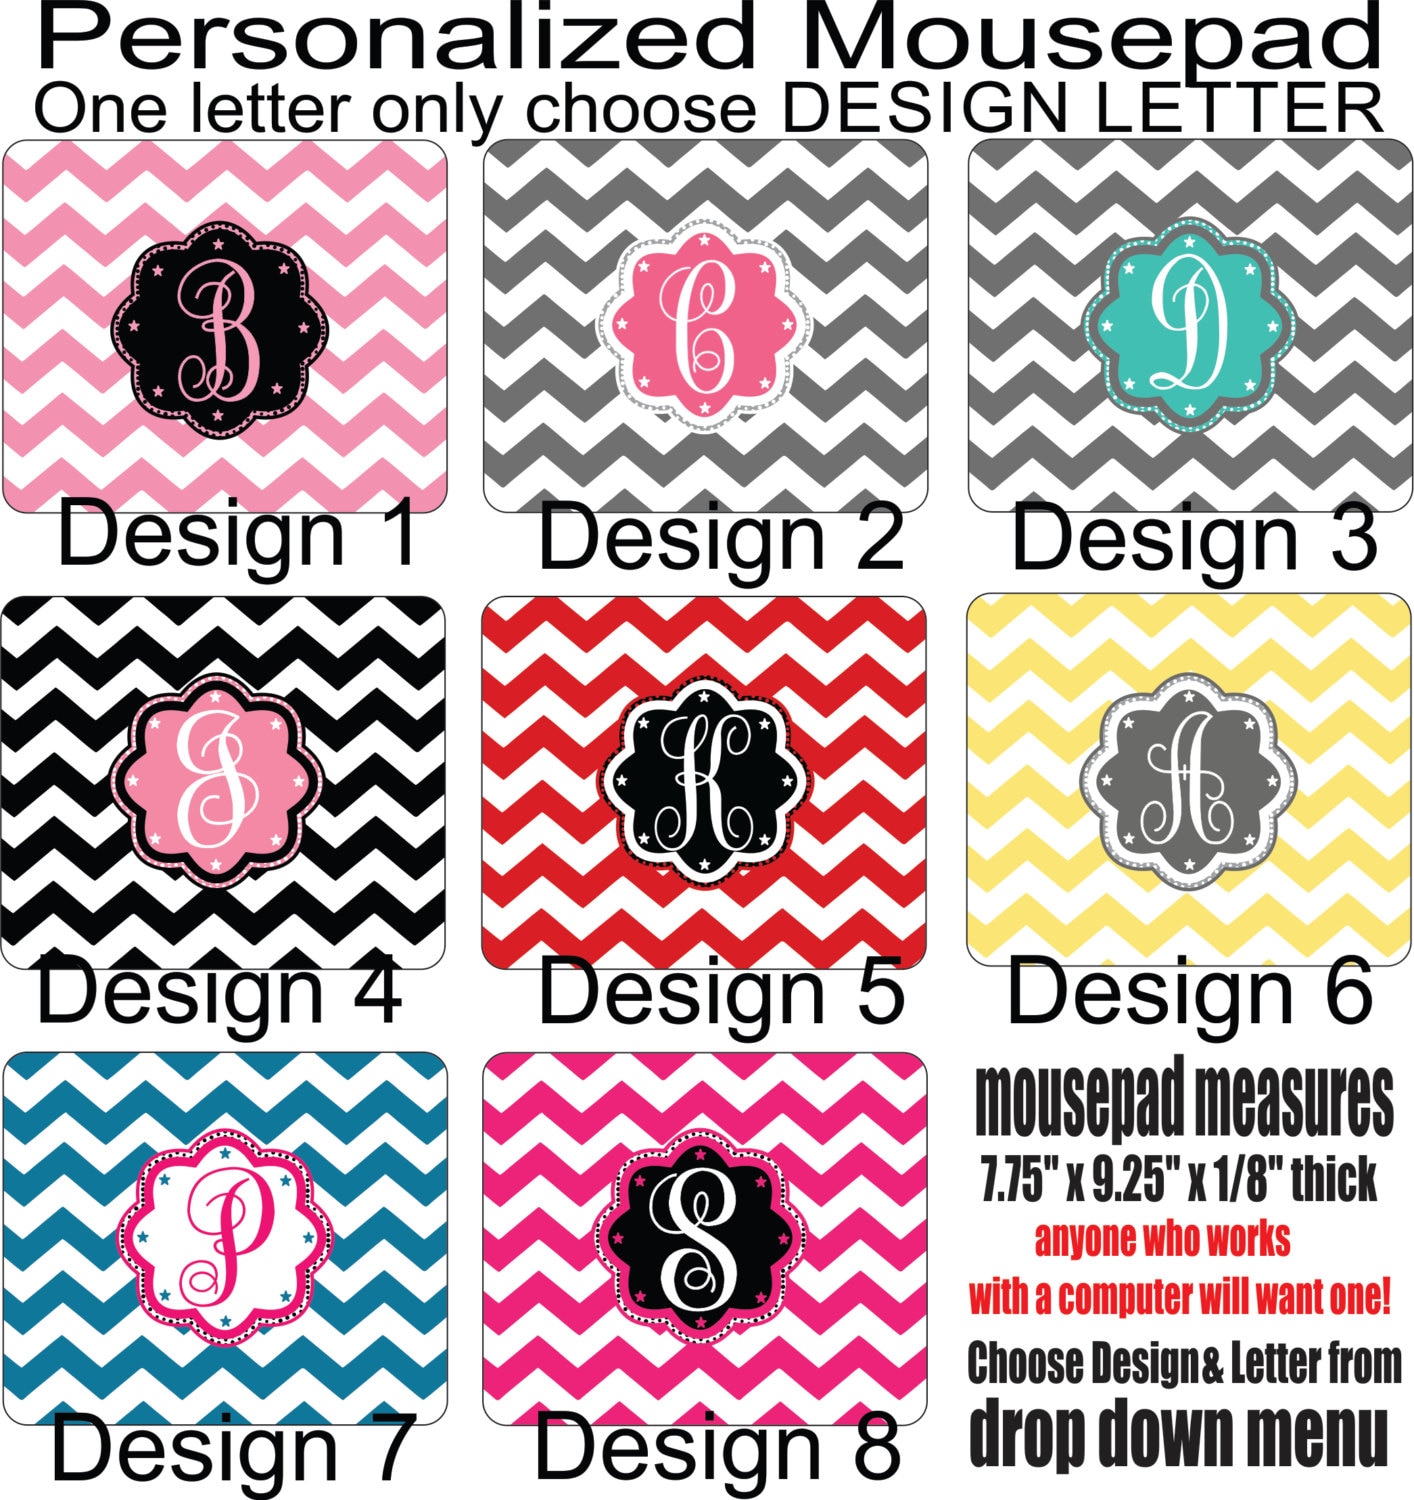 Personalized Mouse Pad Chevron Design with Monogram intial letters 